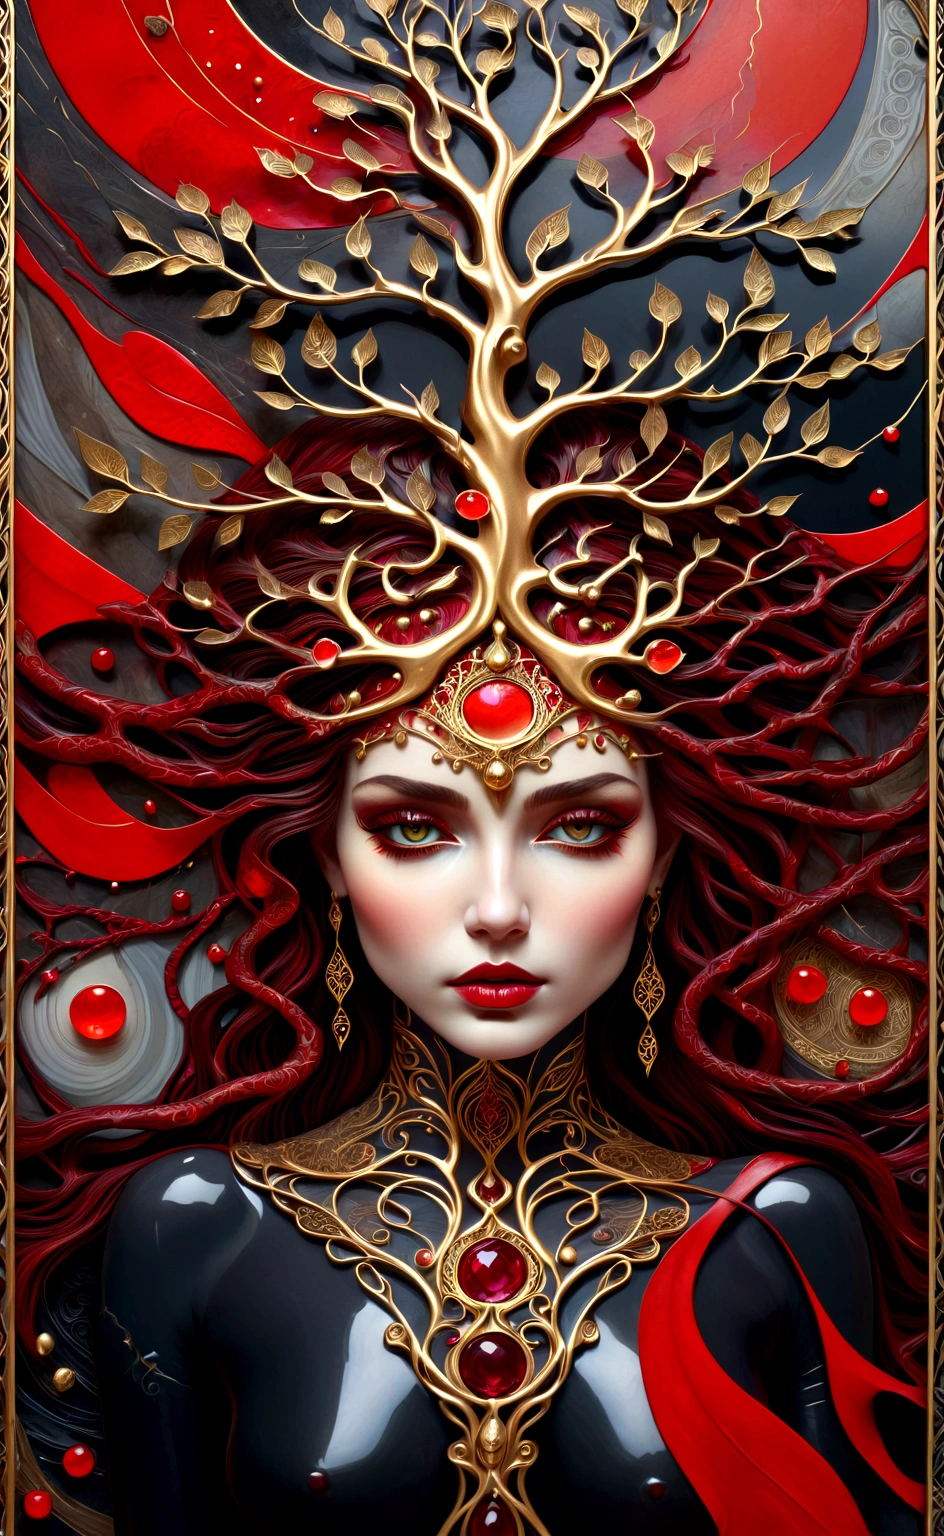 a beautiful portrait of a woman with the tree of life growing from her head in an abstract celtic texture with a tarot style frame, with colors of obsidian black, shiny gold, and ruby red, highly detailed, intricate design, BY Anne Bachelier,